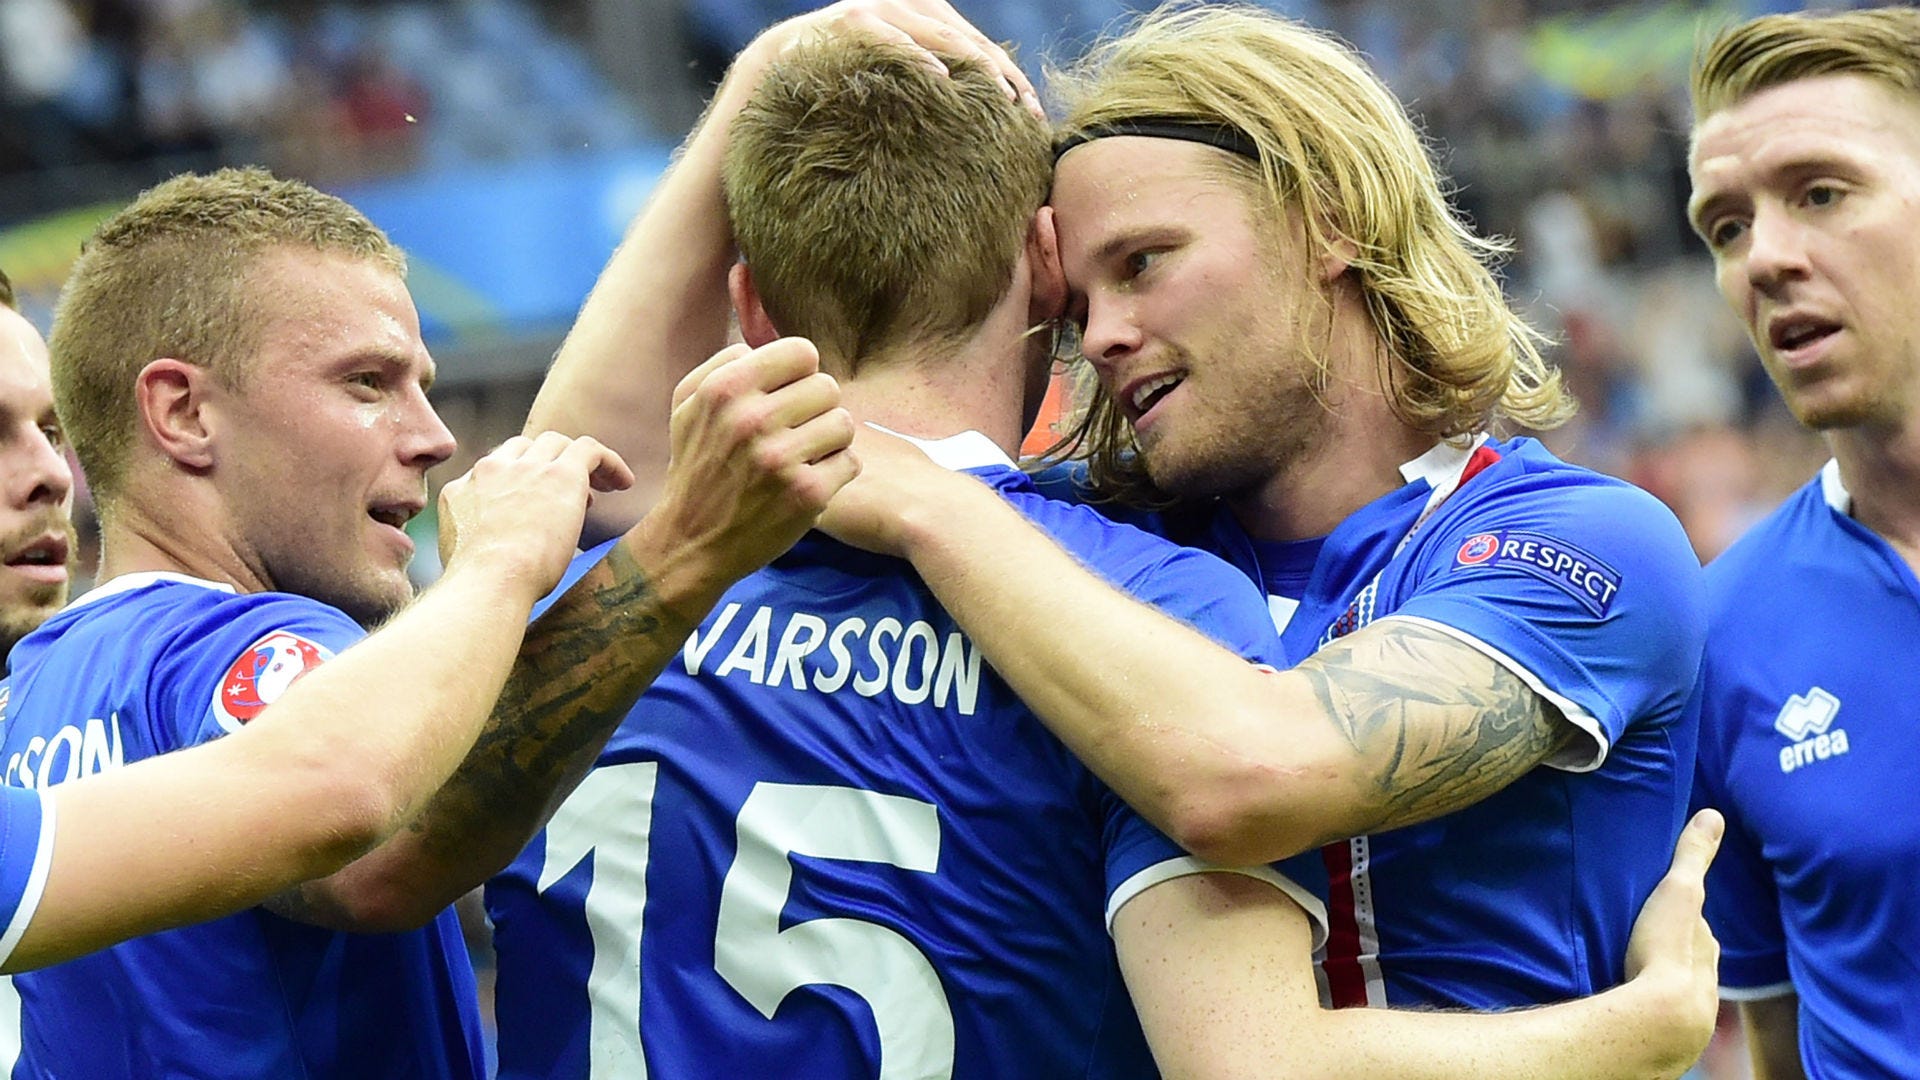 How Did A Nation Of 330 000 People Qualify For Euro 16 The Secret Behind The Iceland Miracle Goal Com